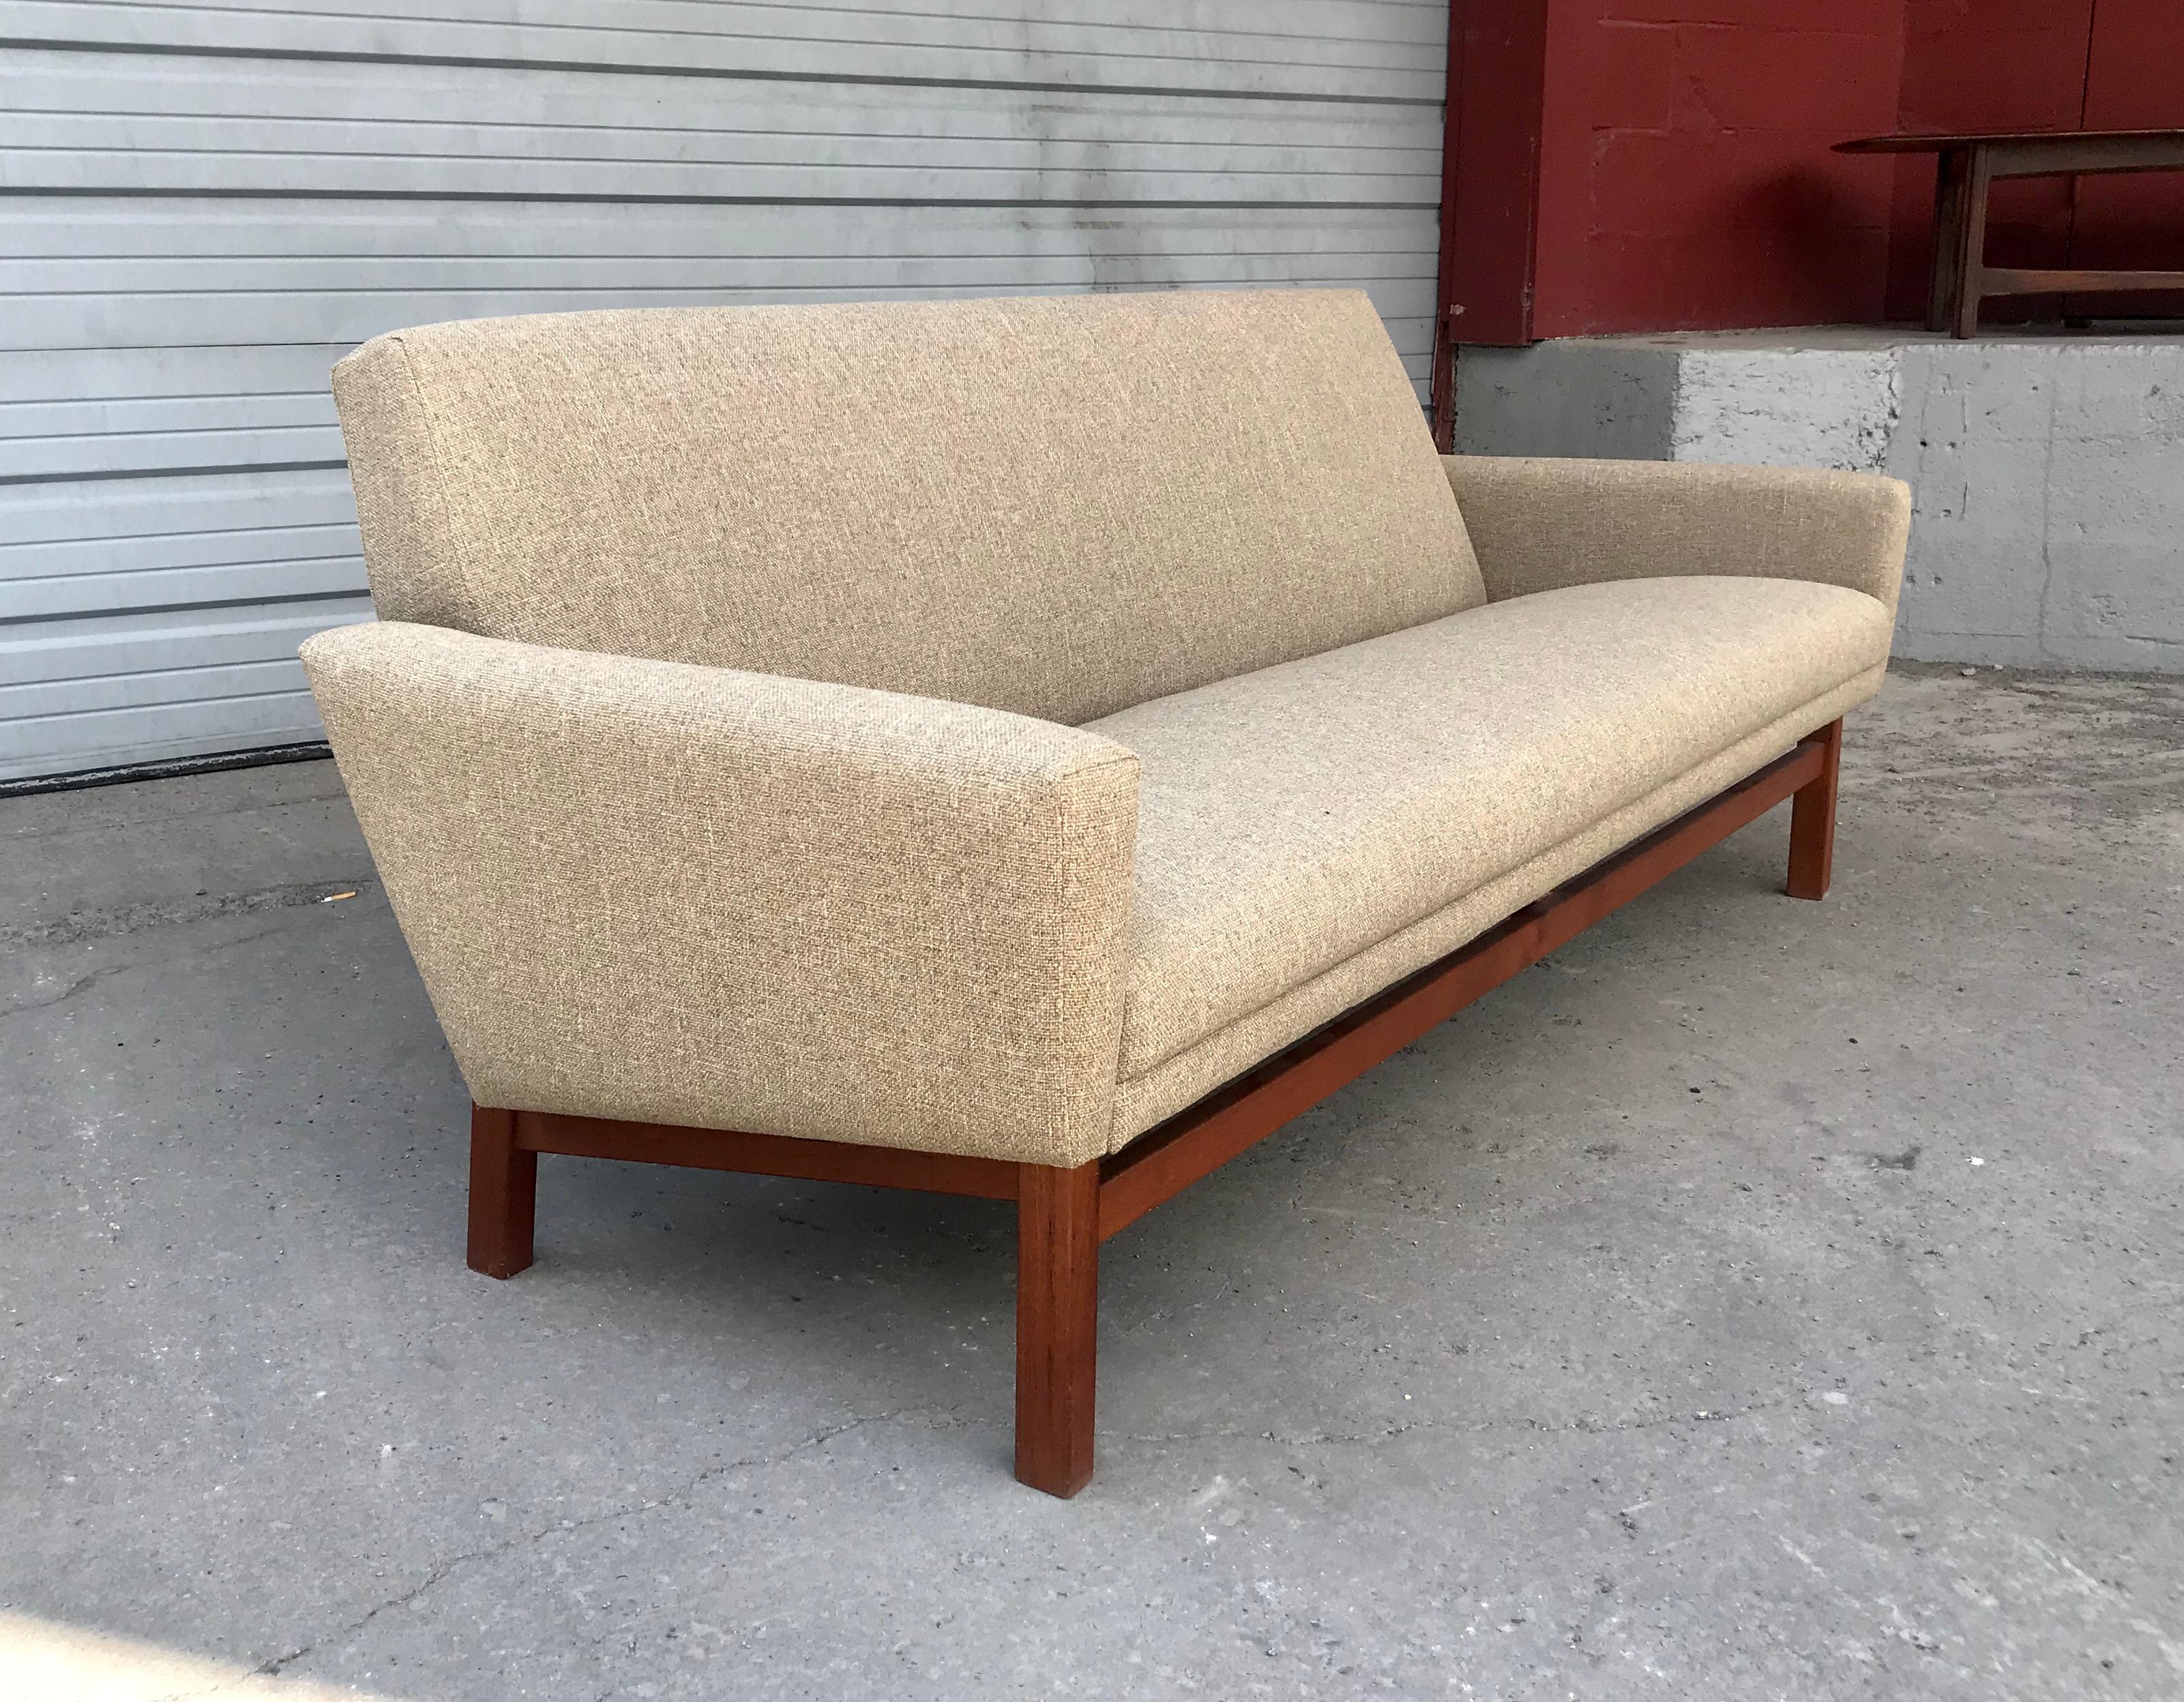 Classic Danish modern sofa, teak wood base and oatmeal color wool upholstery, stunning lines, extremely comfortable, Hand delivery avail to New York City or anywhere en route from Buffalo NY.